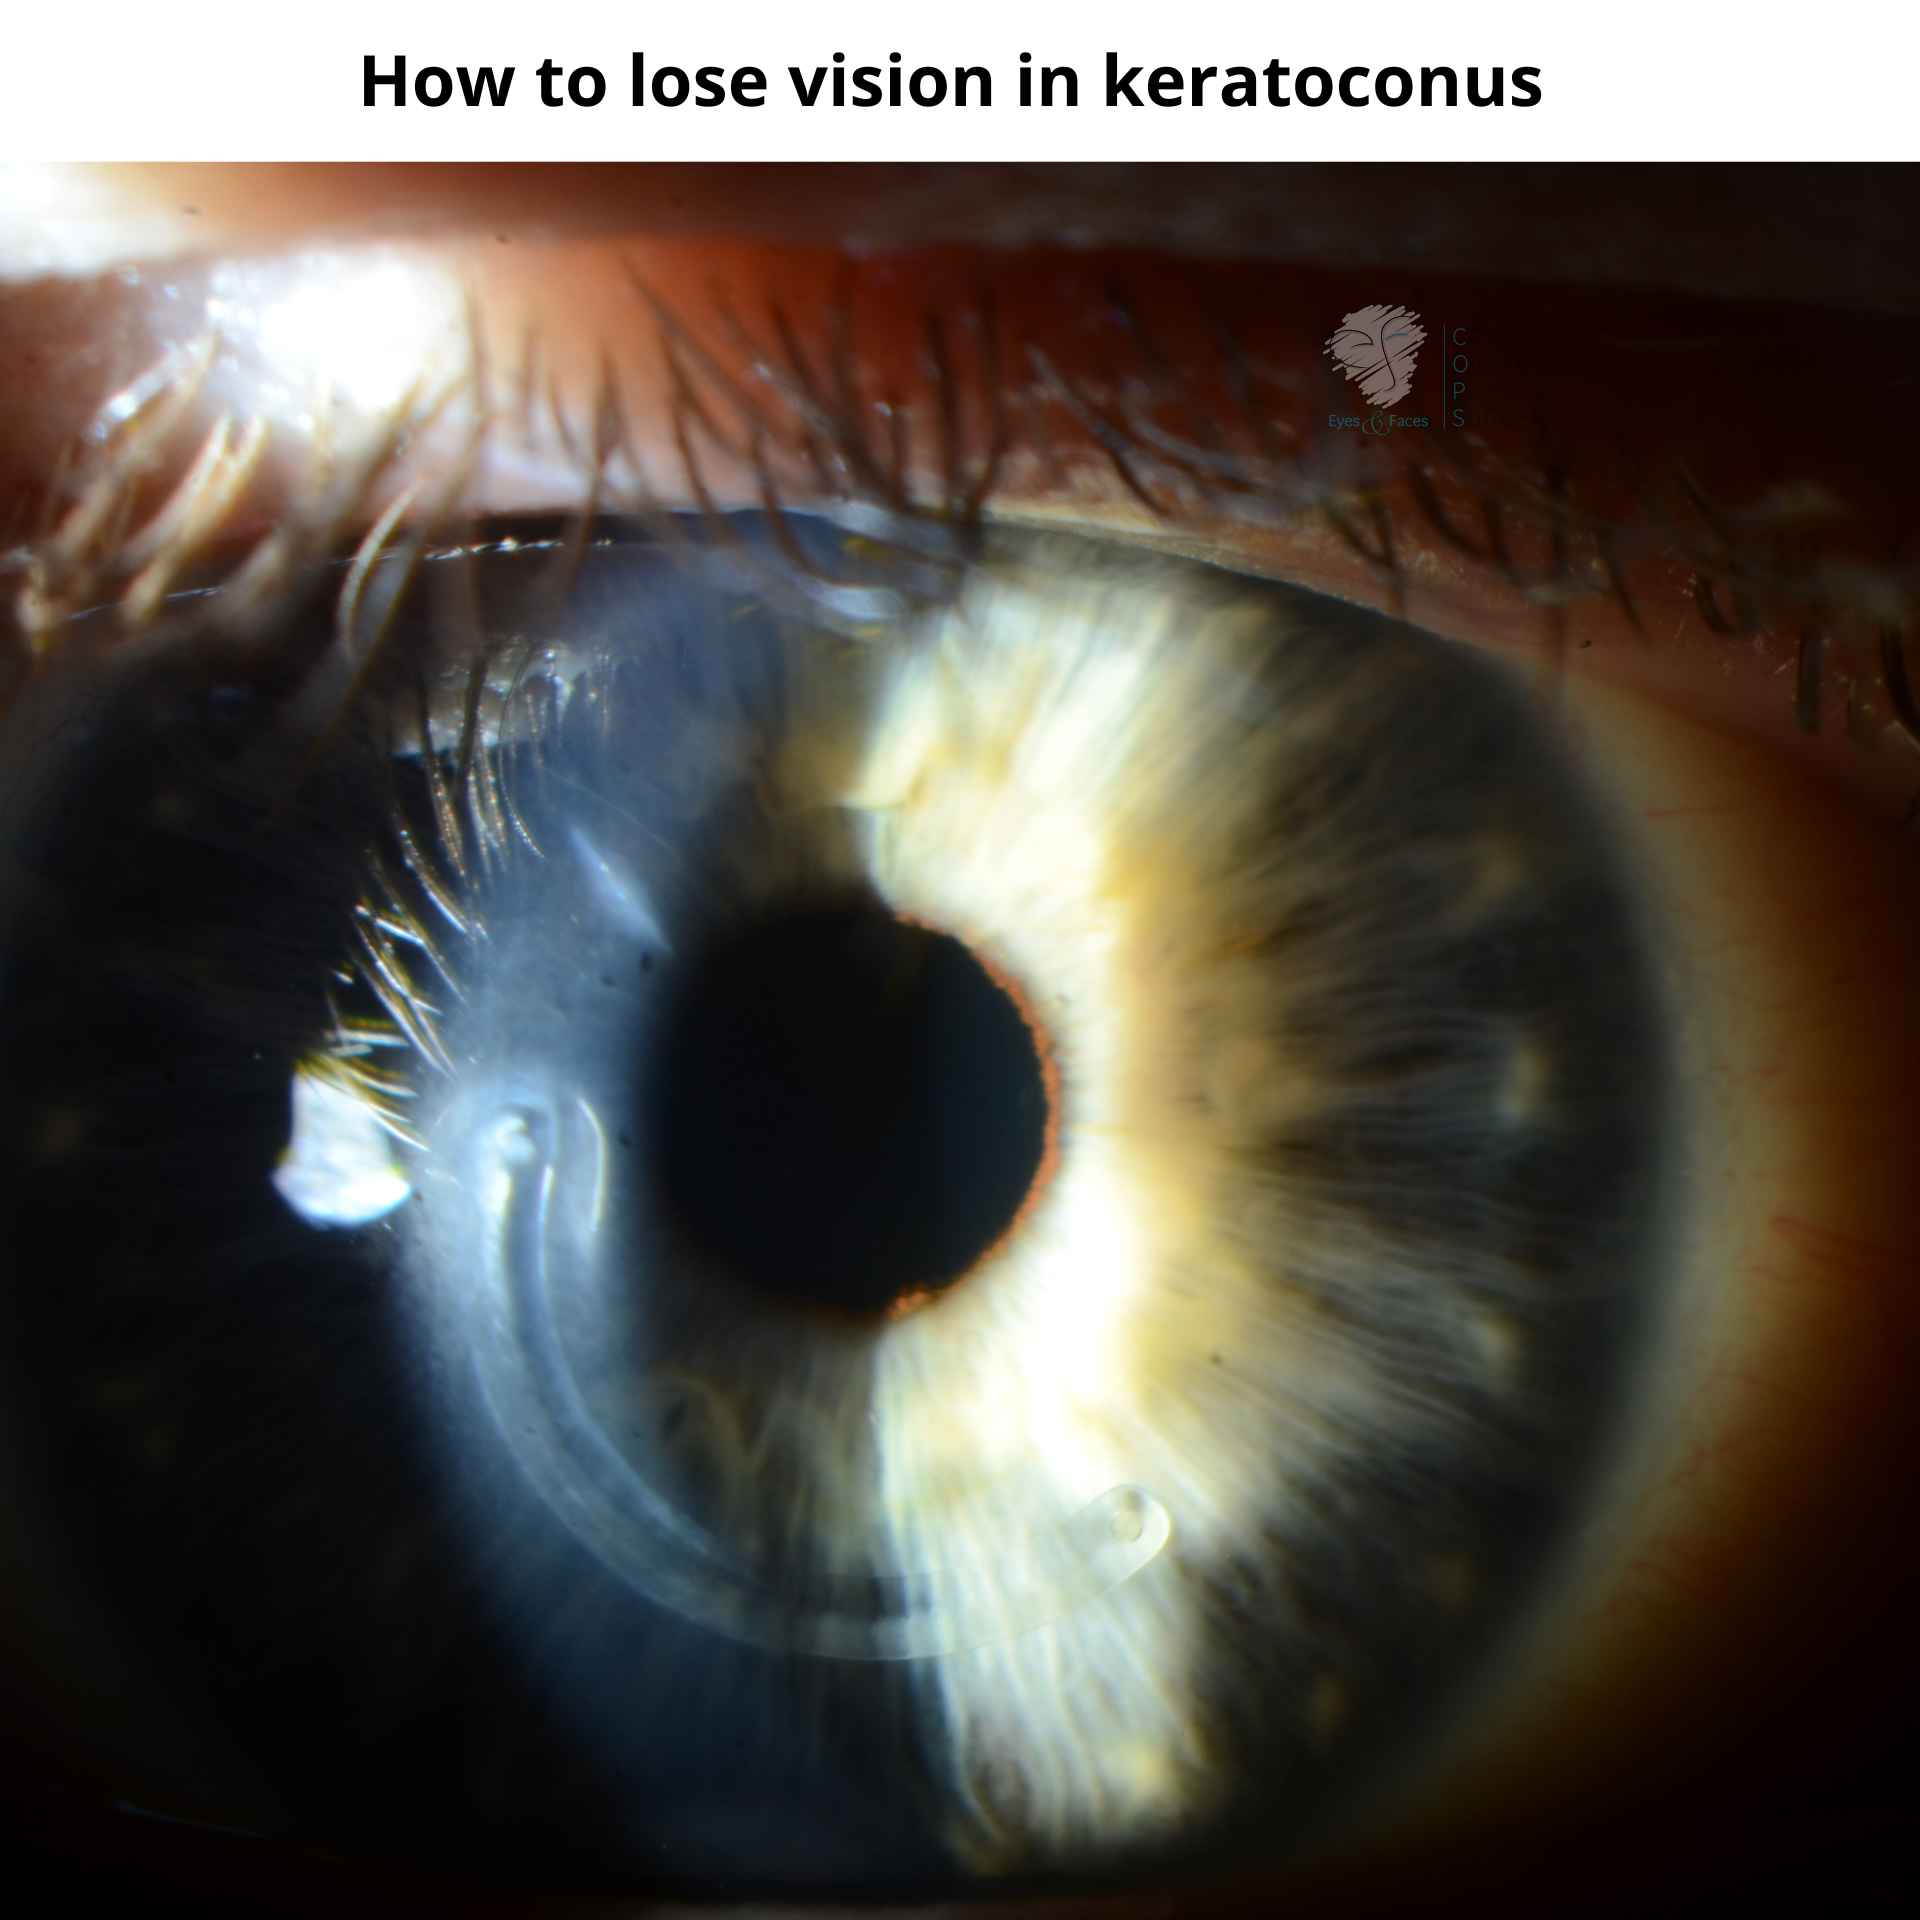 Losing vision in keratoconus with Intacs. See the plastic ring in the eye, that is Intacs.